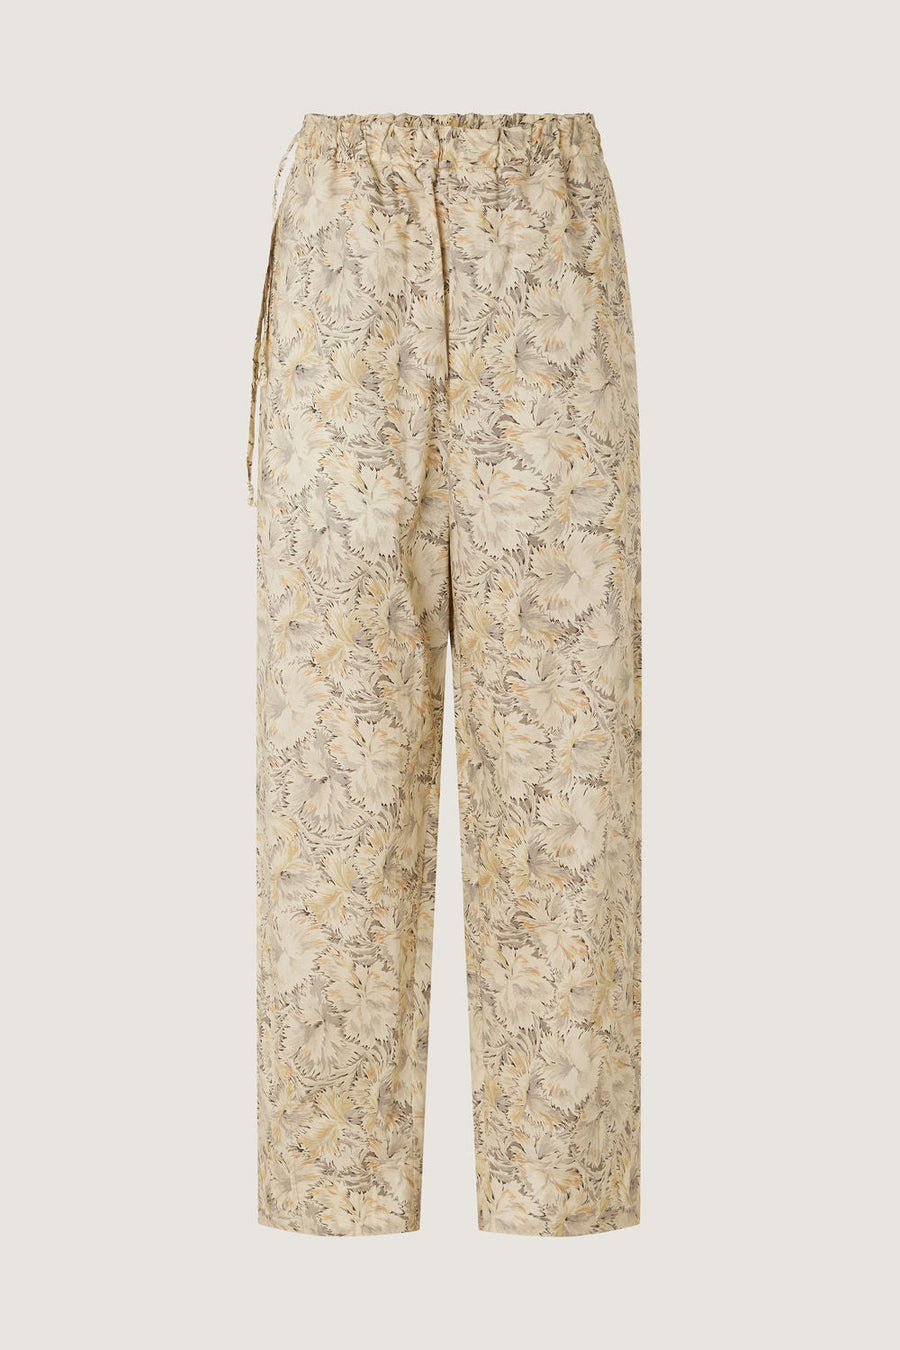 ANDREAS TROUSERS